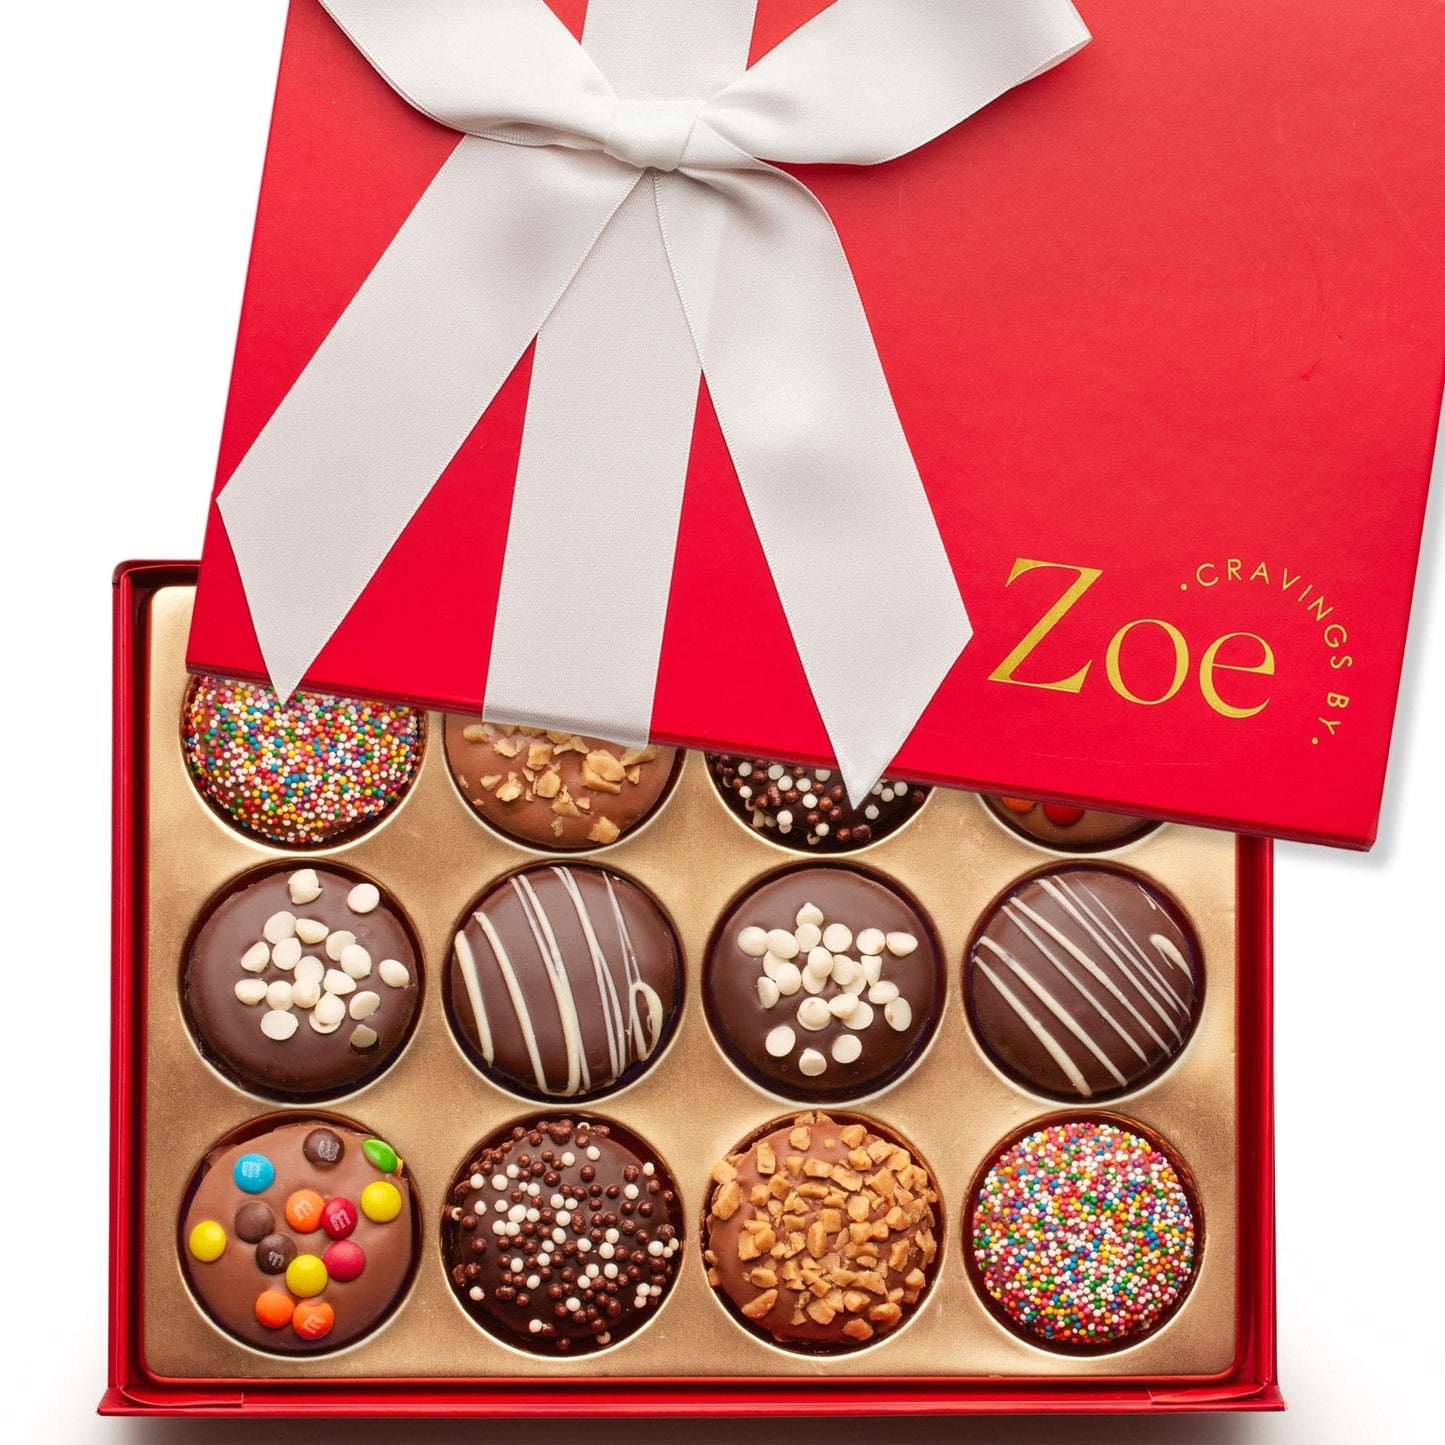 Chocolate Covered Oreos Red Gift Box - Cravings by Zoe - Gourmet Chocolate